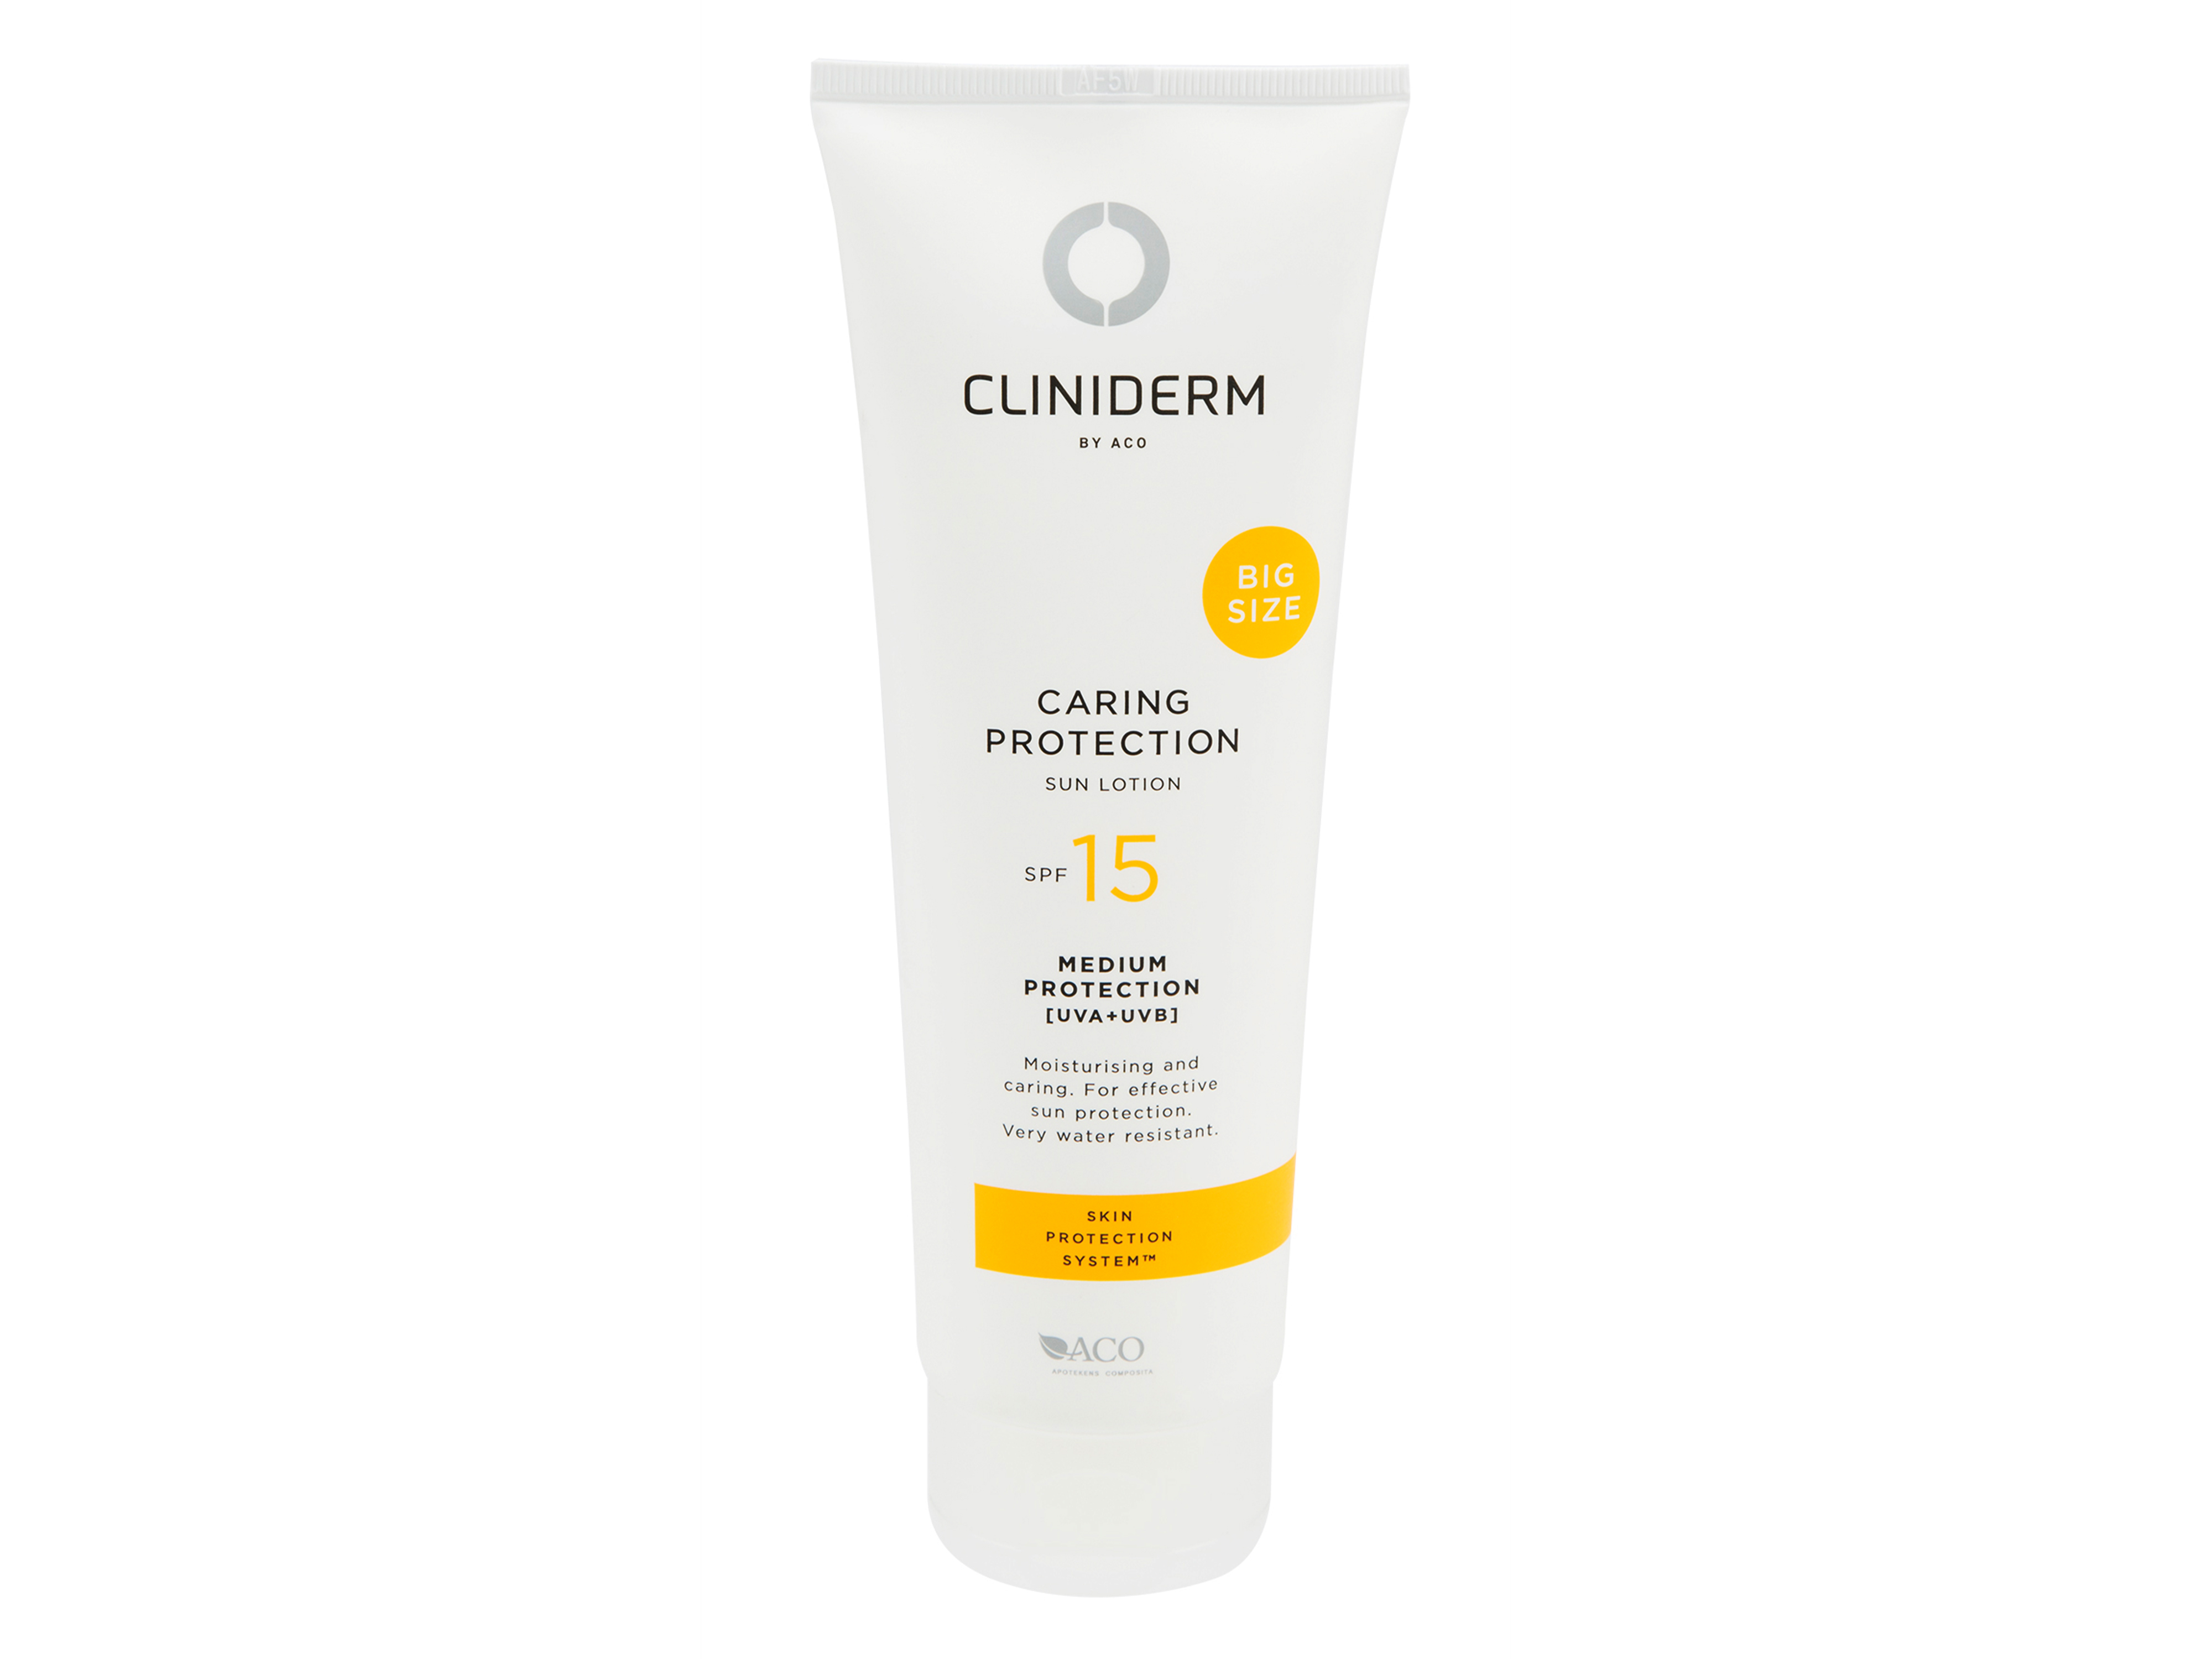 Cliniderm Caring Protection Sun Lotion SPF15, 250 ml